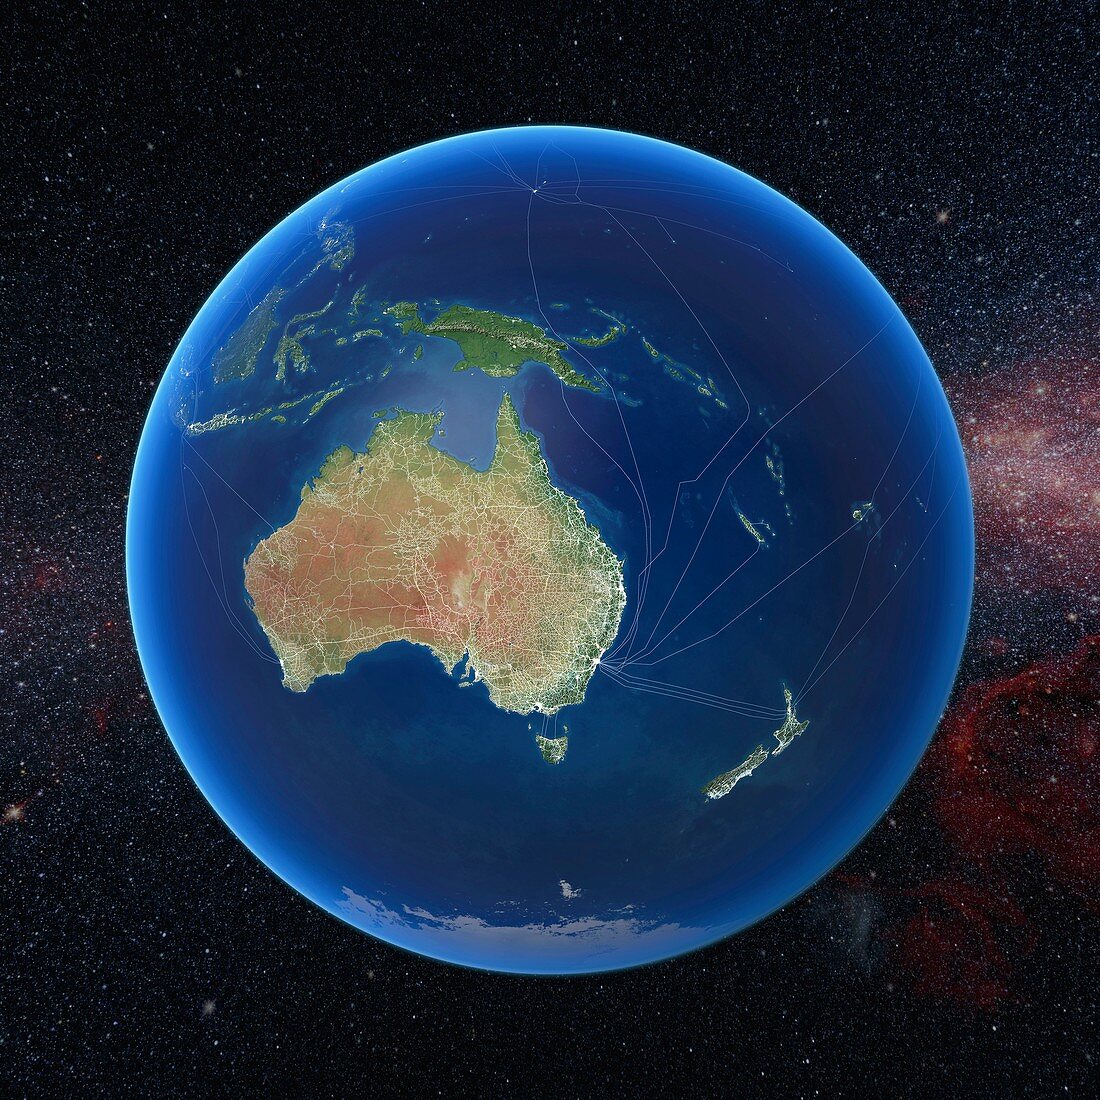 Human presence over Oceania at night